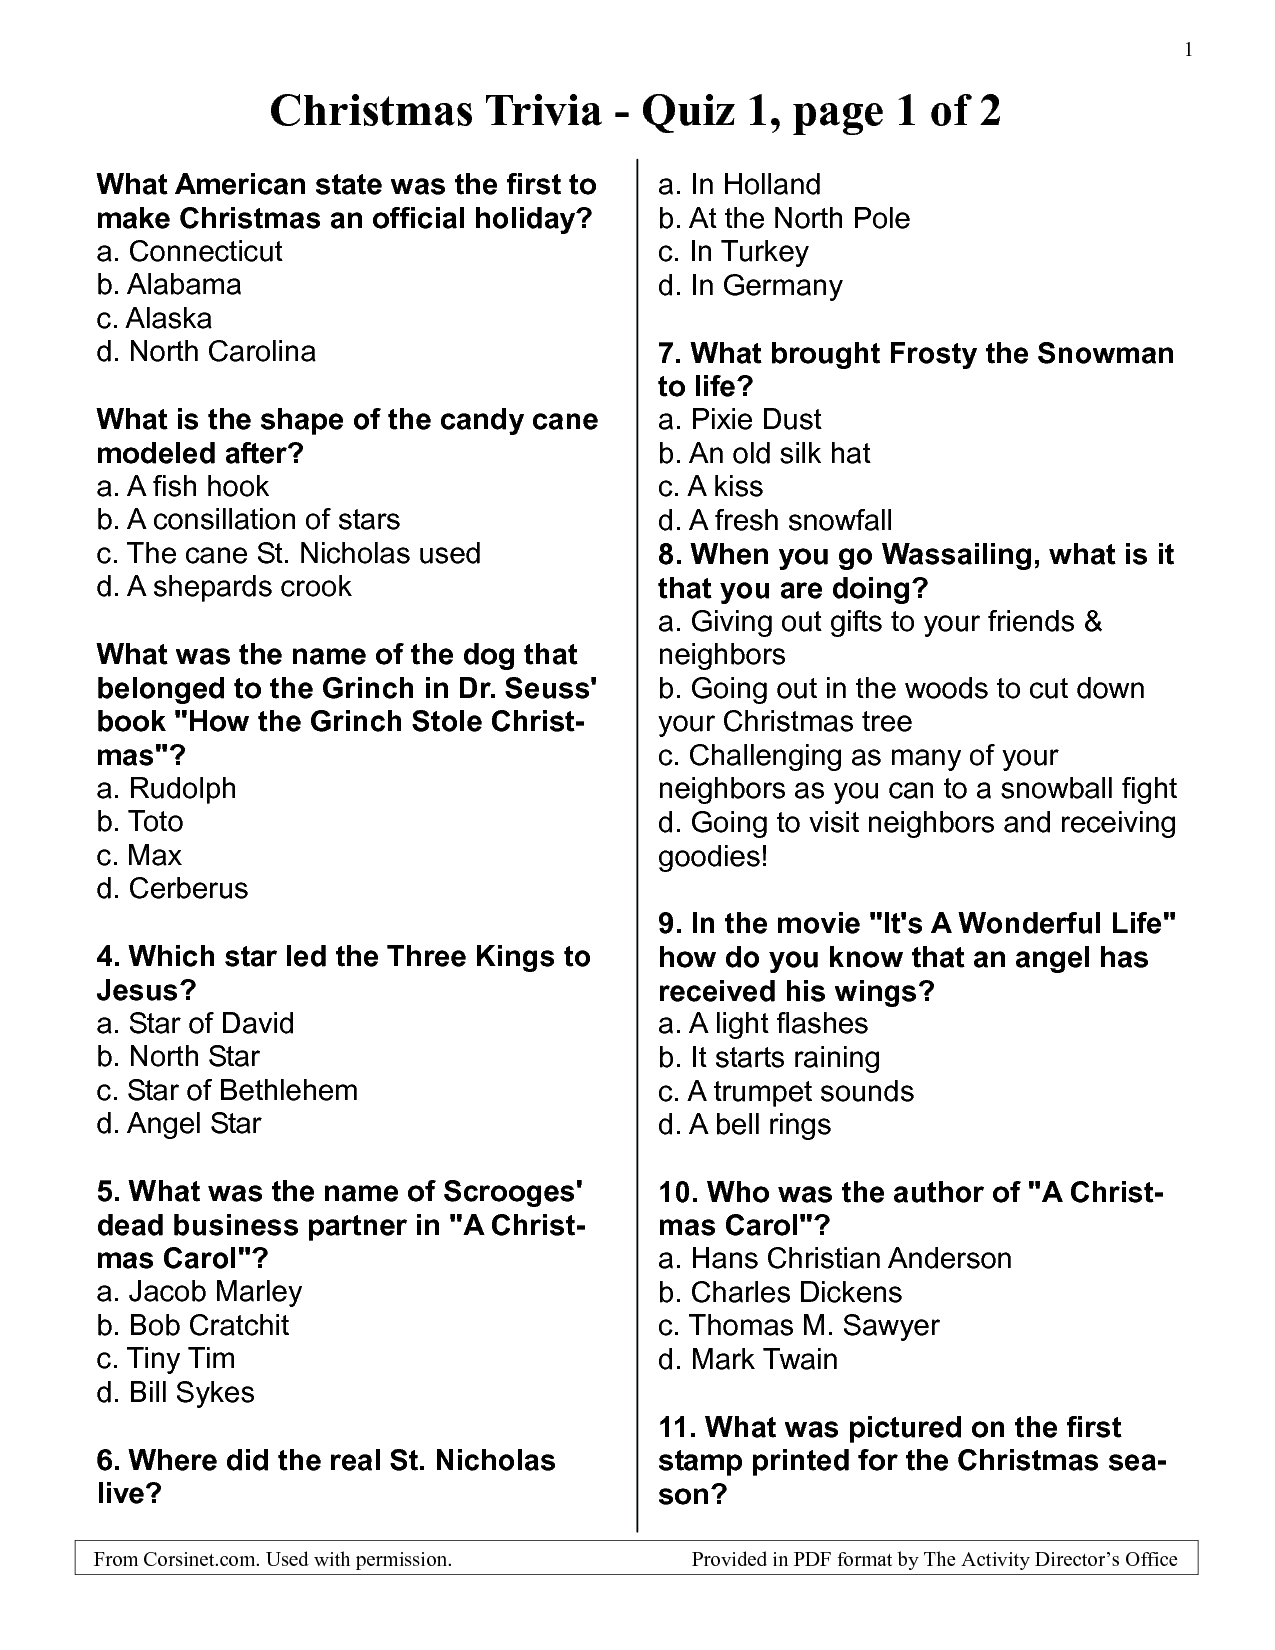 free-printable-bible-trivia-questions-and-answers-multiple-choice